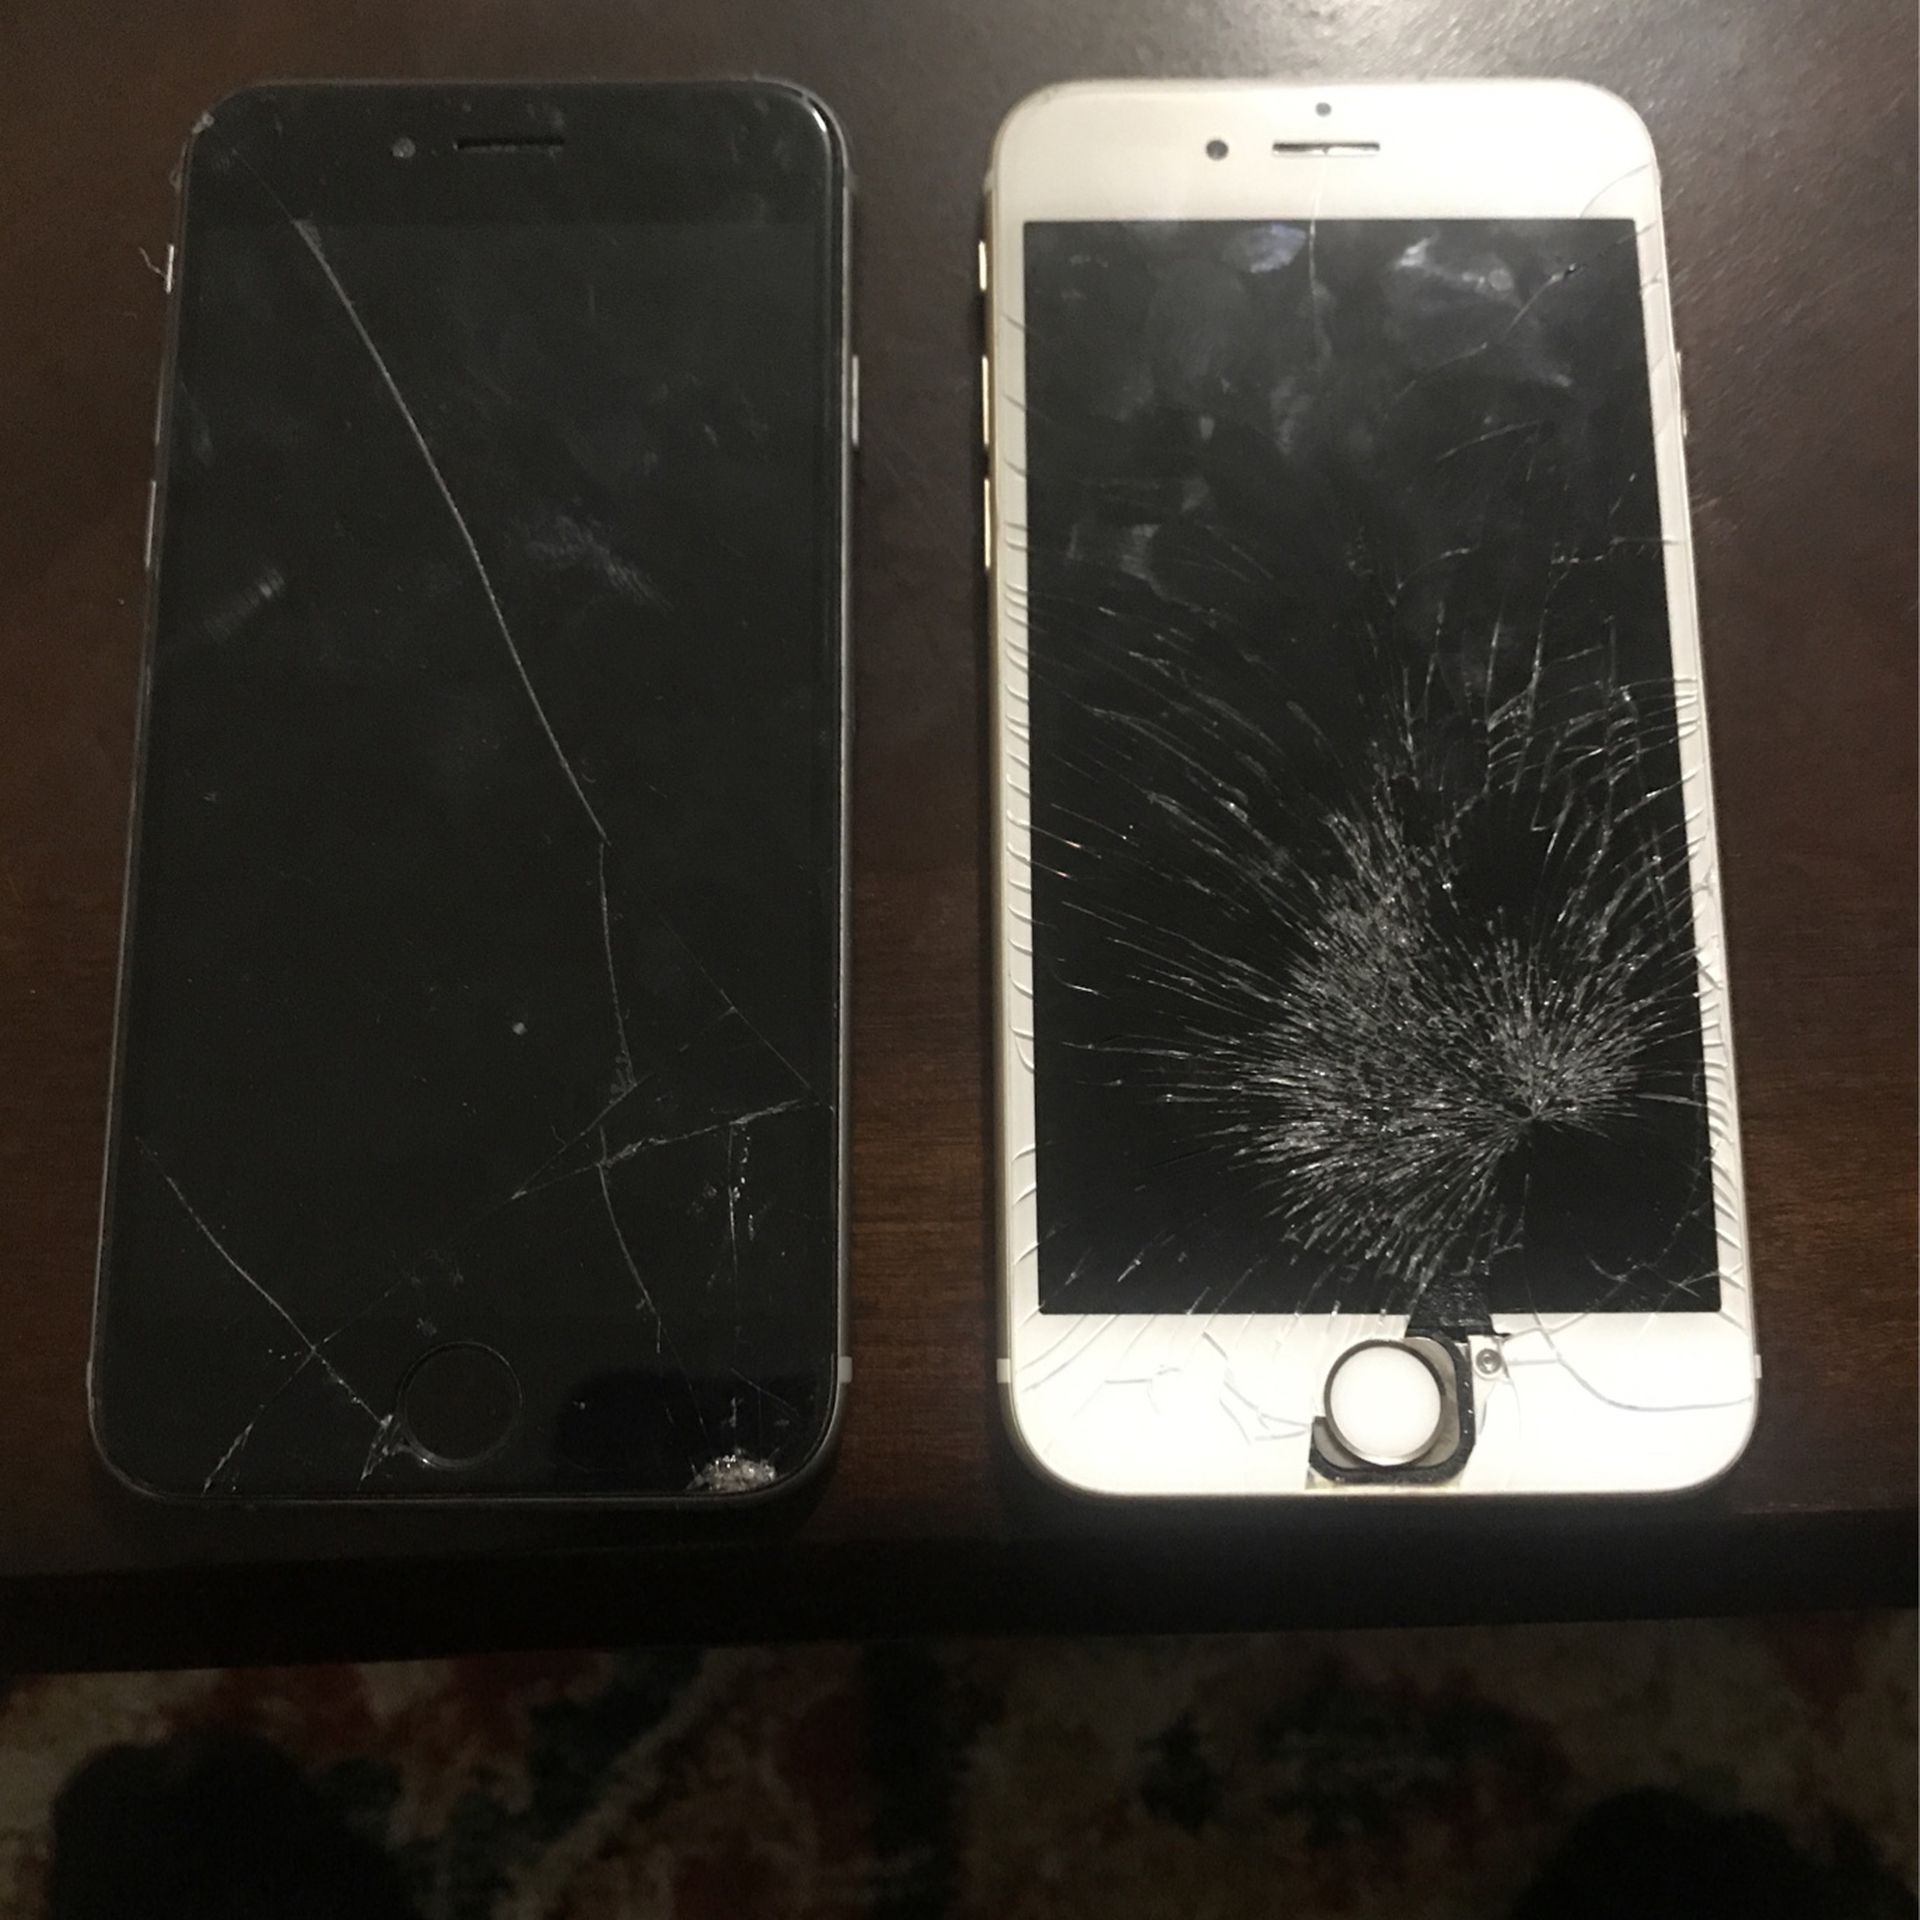 iPhone 6 Selling For Parts Water Damage On Both.